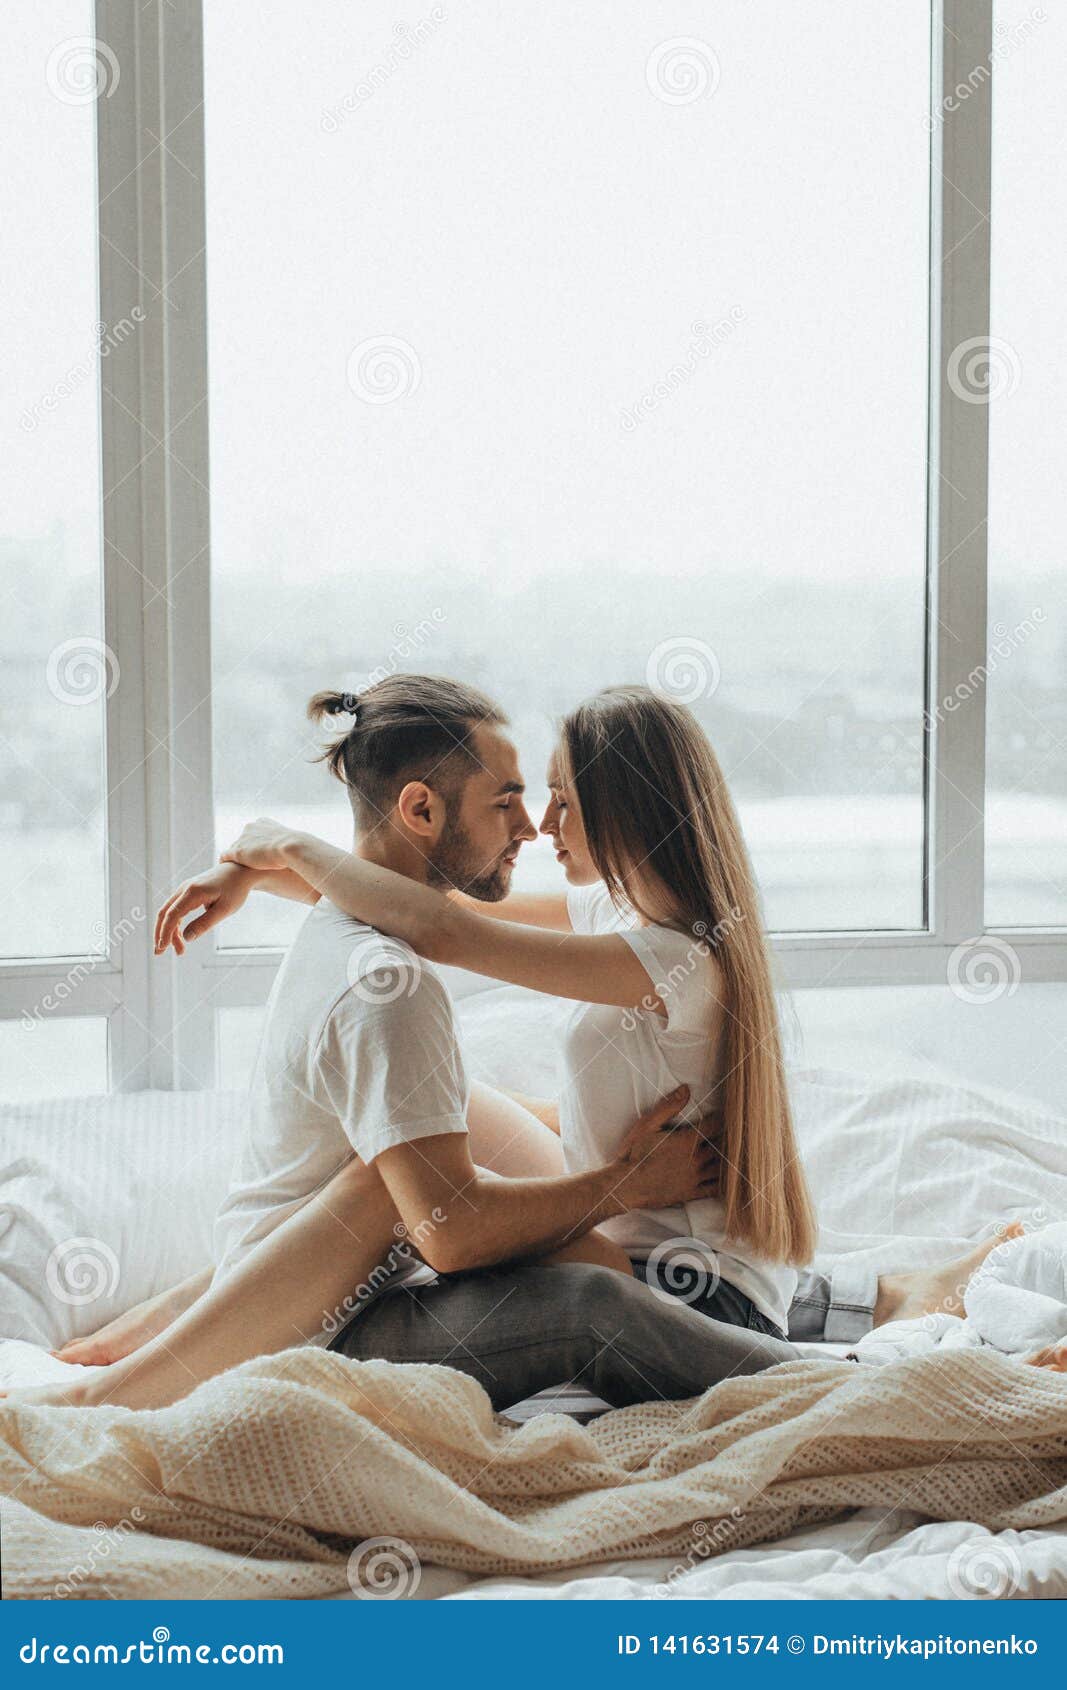 6,636 Bed Kissing Stock Photos pic